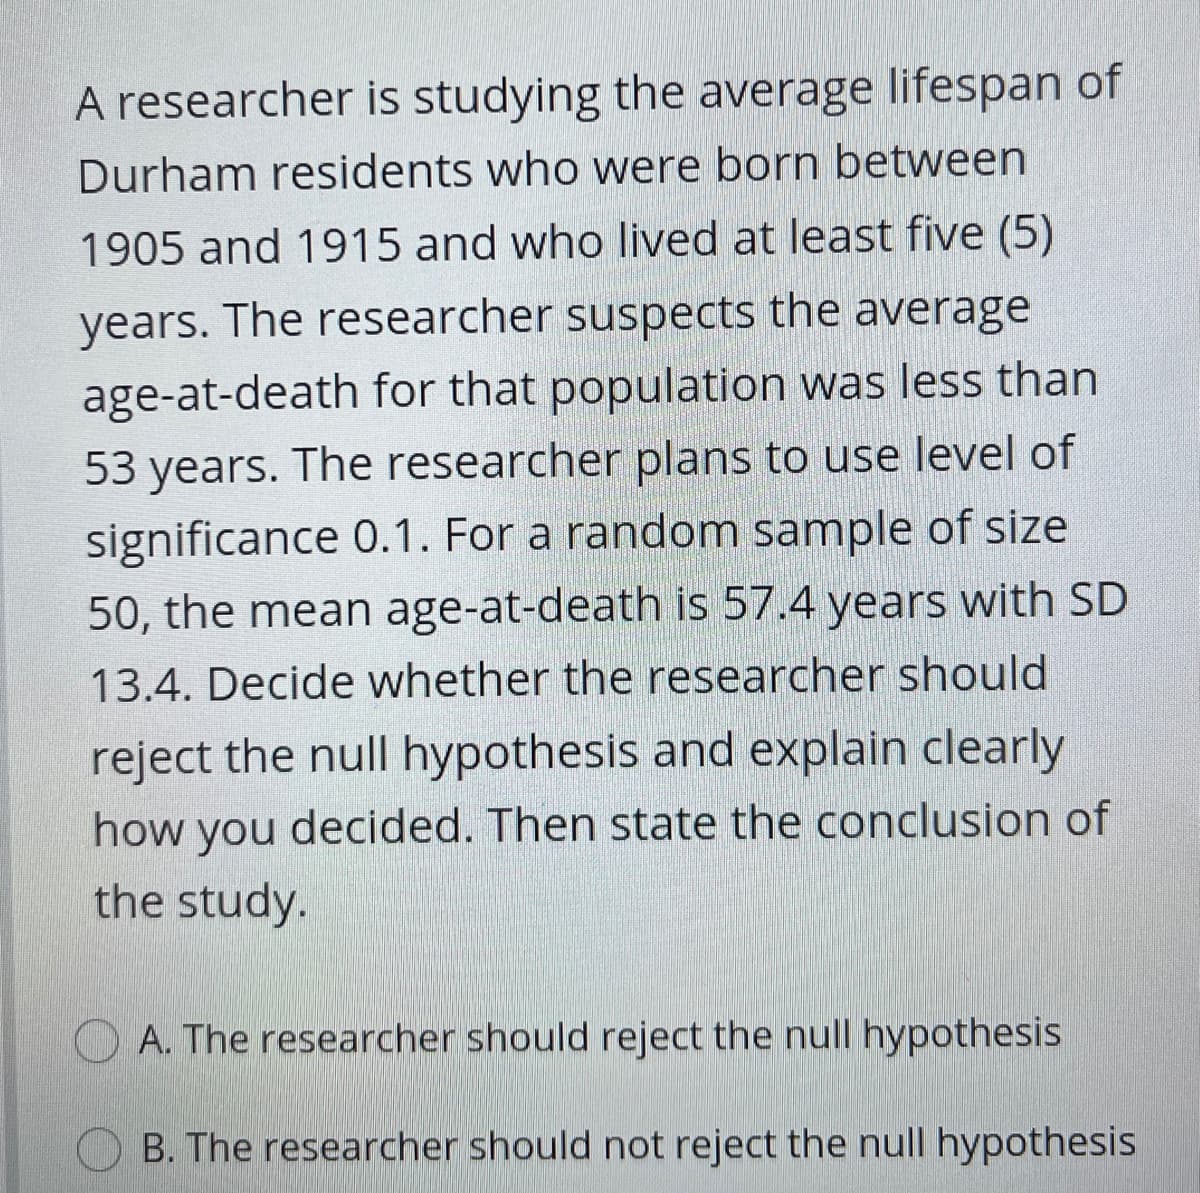 A researcher is studying the average lifespan of
Durham residents who were born between
1905 and 1915 and who lived at least five (5)
years. The researcher suspects the average
age-at-death for that population was less than
53 years. The researcher plans to use level of
significance 0.1. For a random sample of size
50, the mean age-at-death is 57.4 years with SD
13.4. Decide whether the researcher should
reject the null hypothesis and explain clearly
how you decided. Then state the conclusion of
the study.
A. The researcher should reject the null hypothesis
O B. The researcher should not reject the null hypothesis
